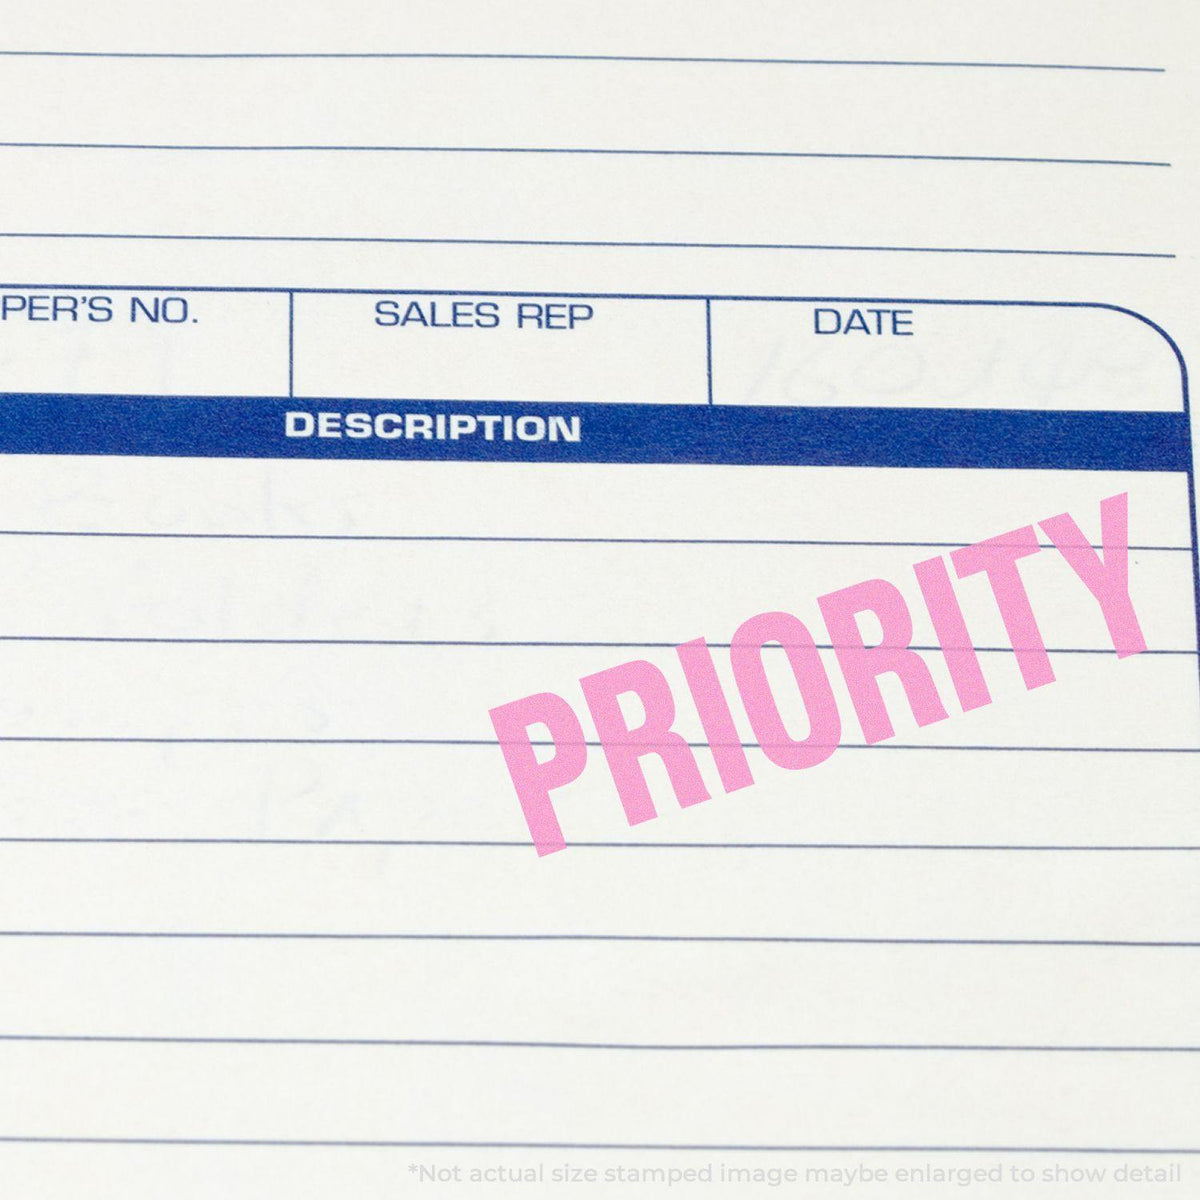 Large Self-Inking Bold Priority Stamp In Use Photo